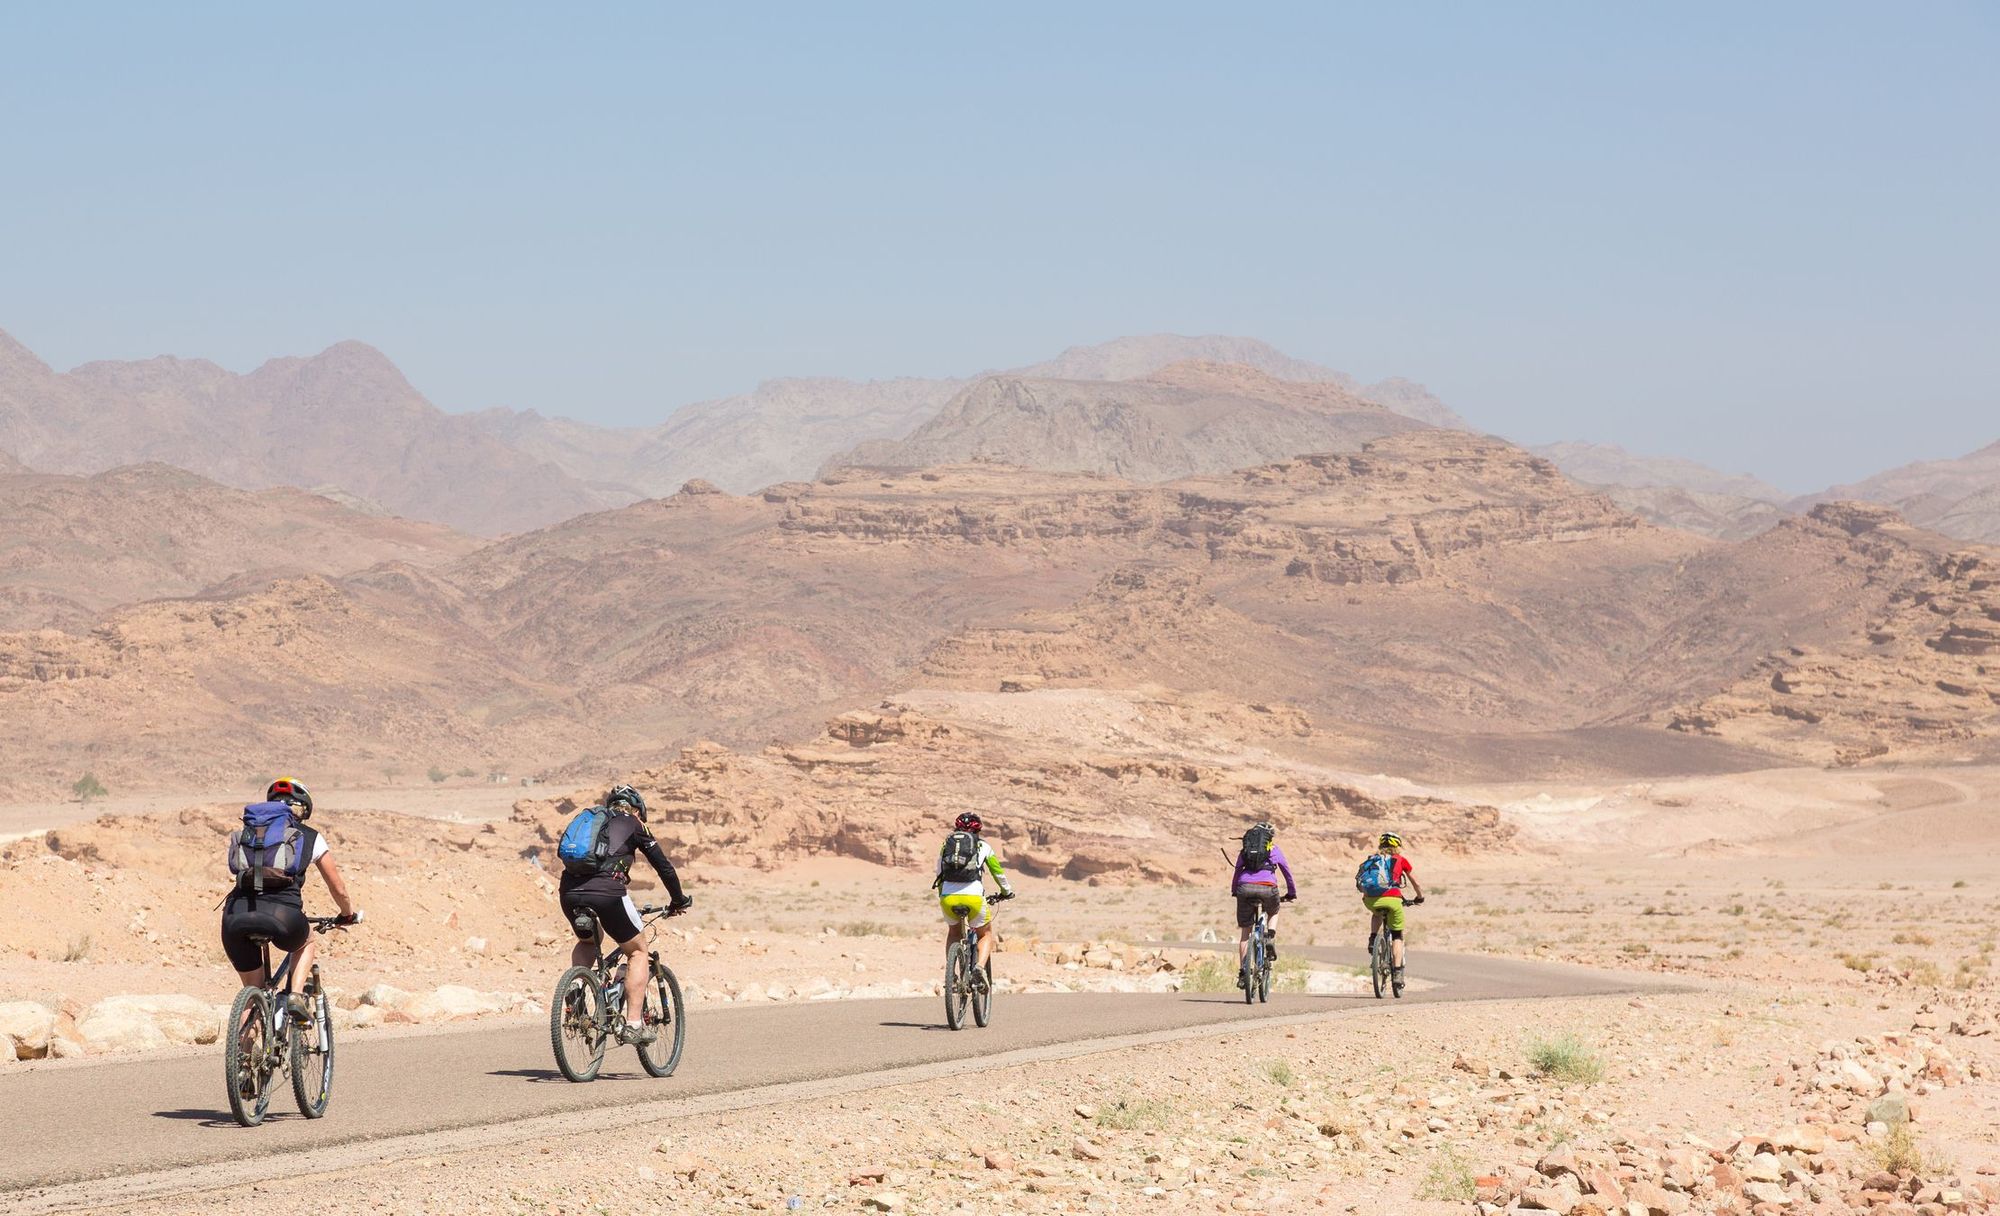 A group of cyclists ride along the road into the mountains near Aqaba, Jordan. Photo: Getty.